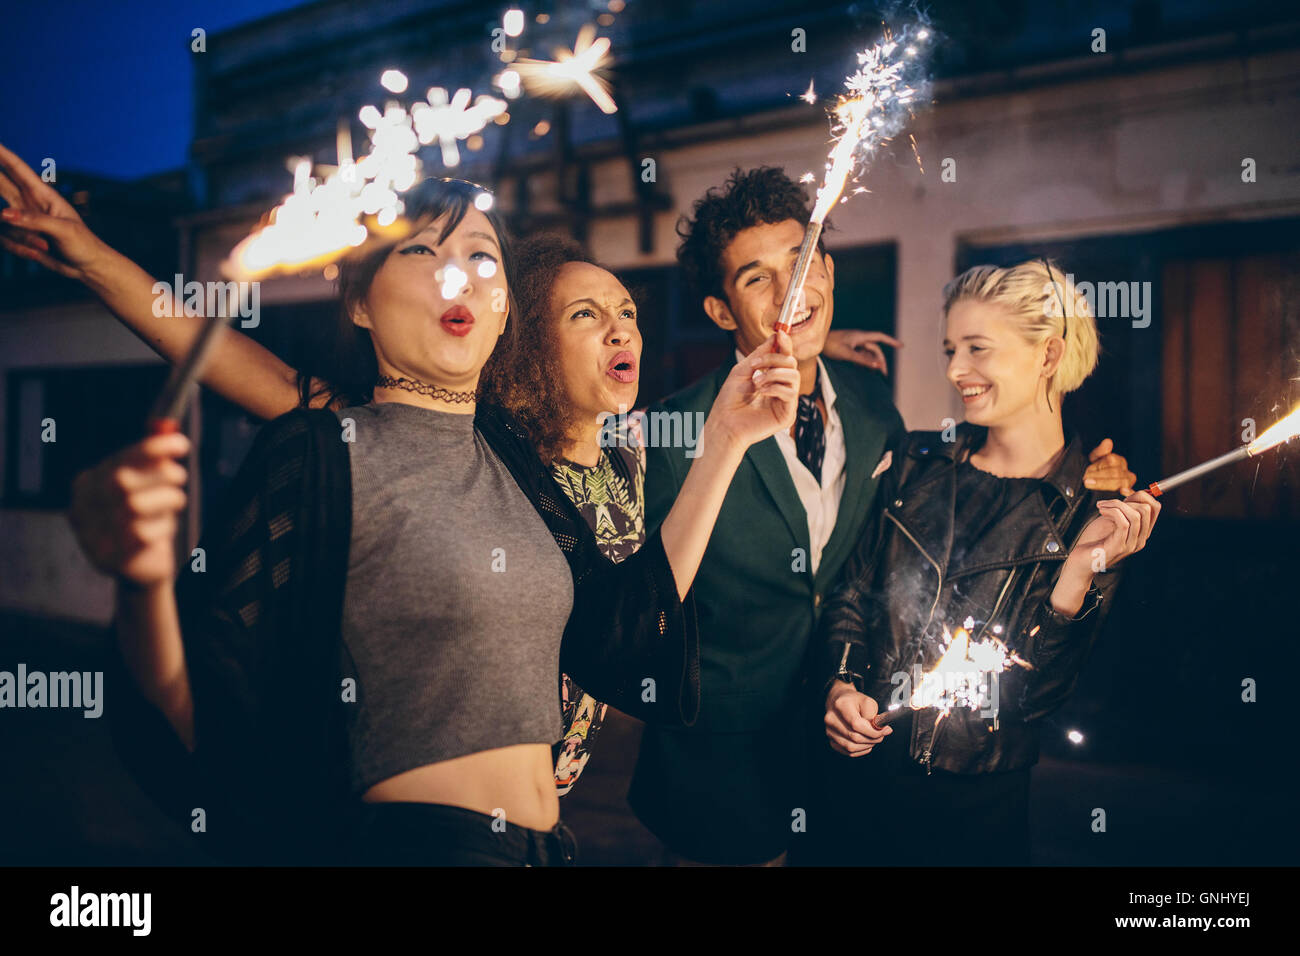 Group of friends enjoying out with sparklers on city street. Young people enjoying new years eve with fireworks. Stock Photo